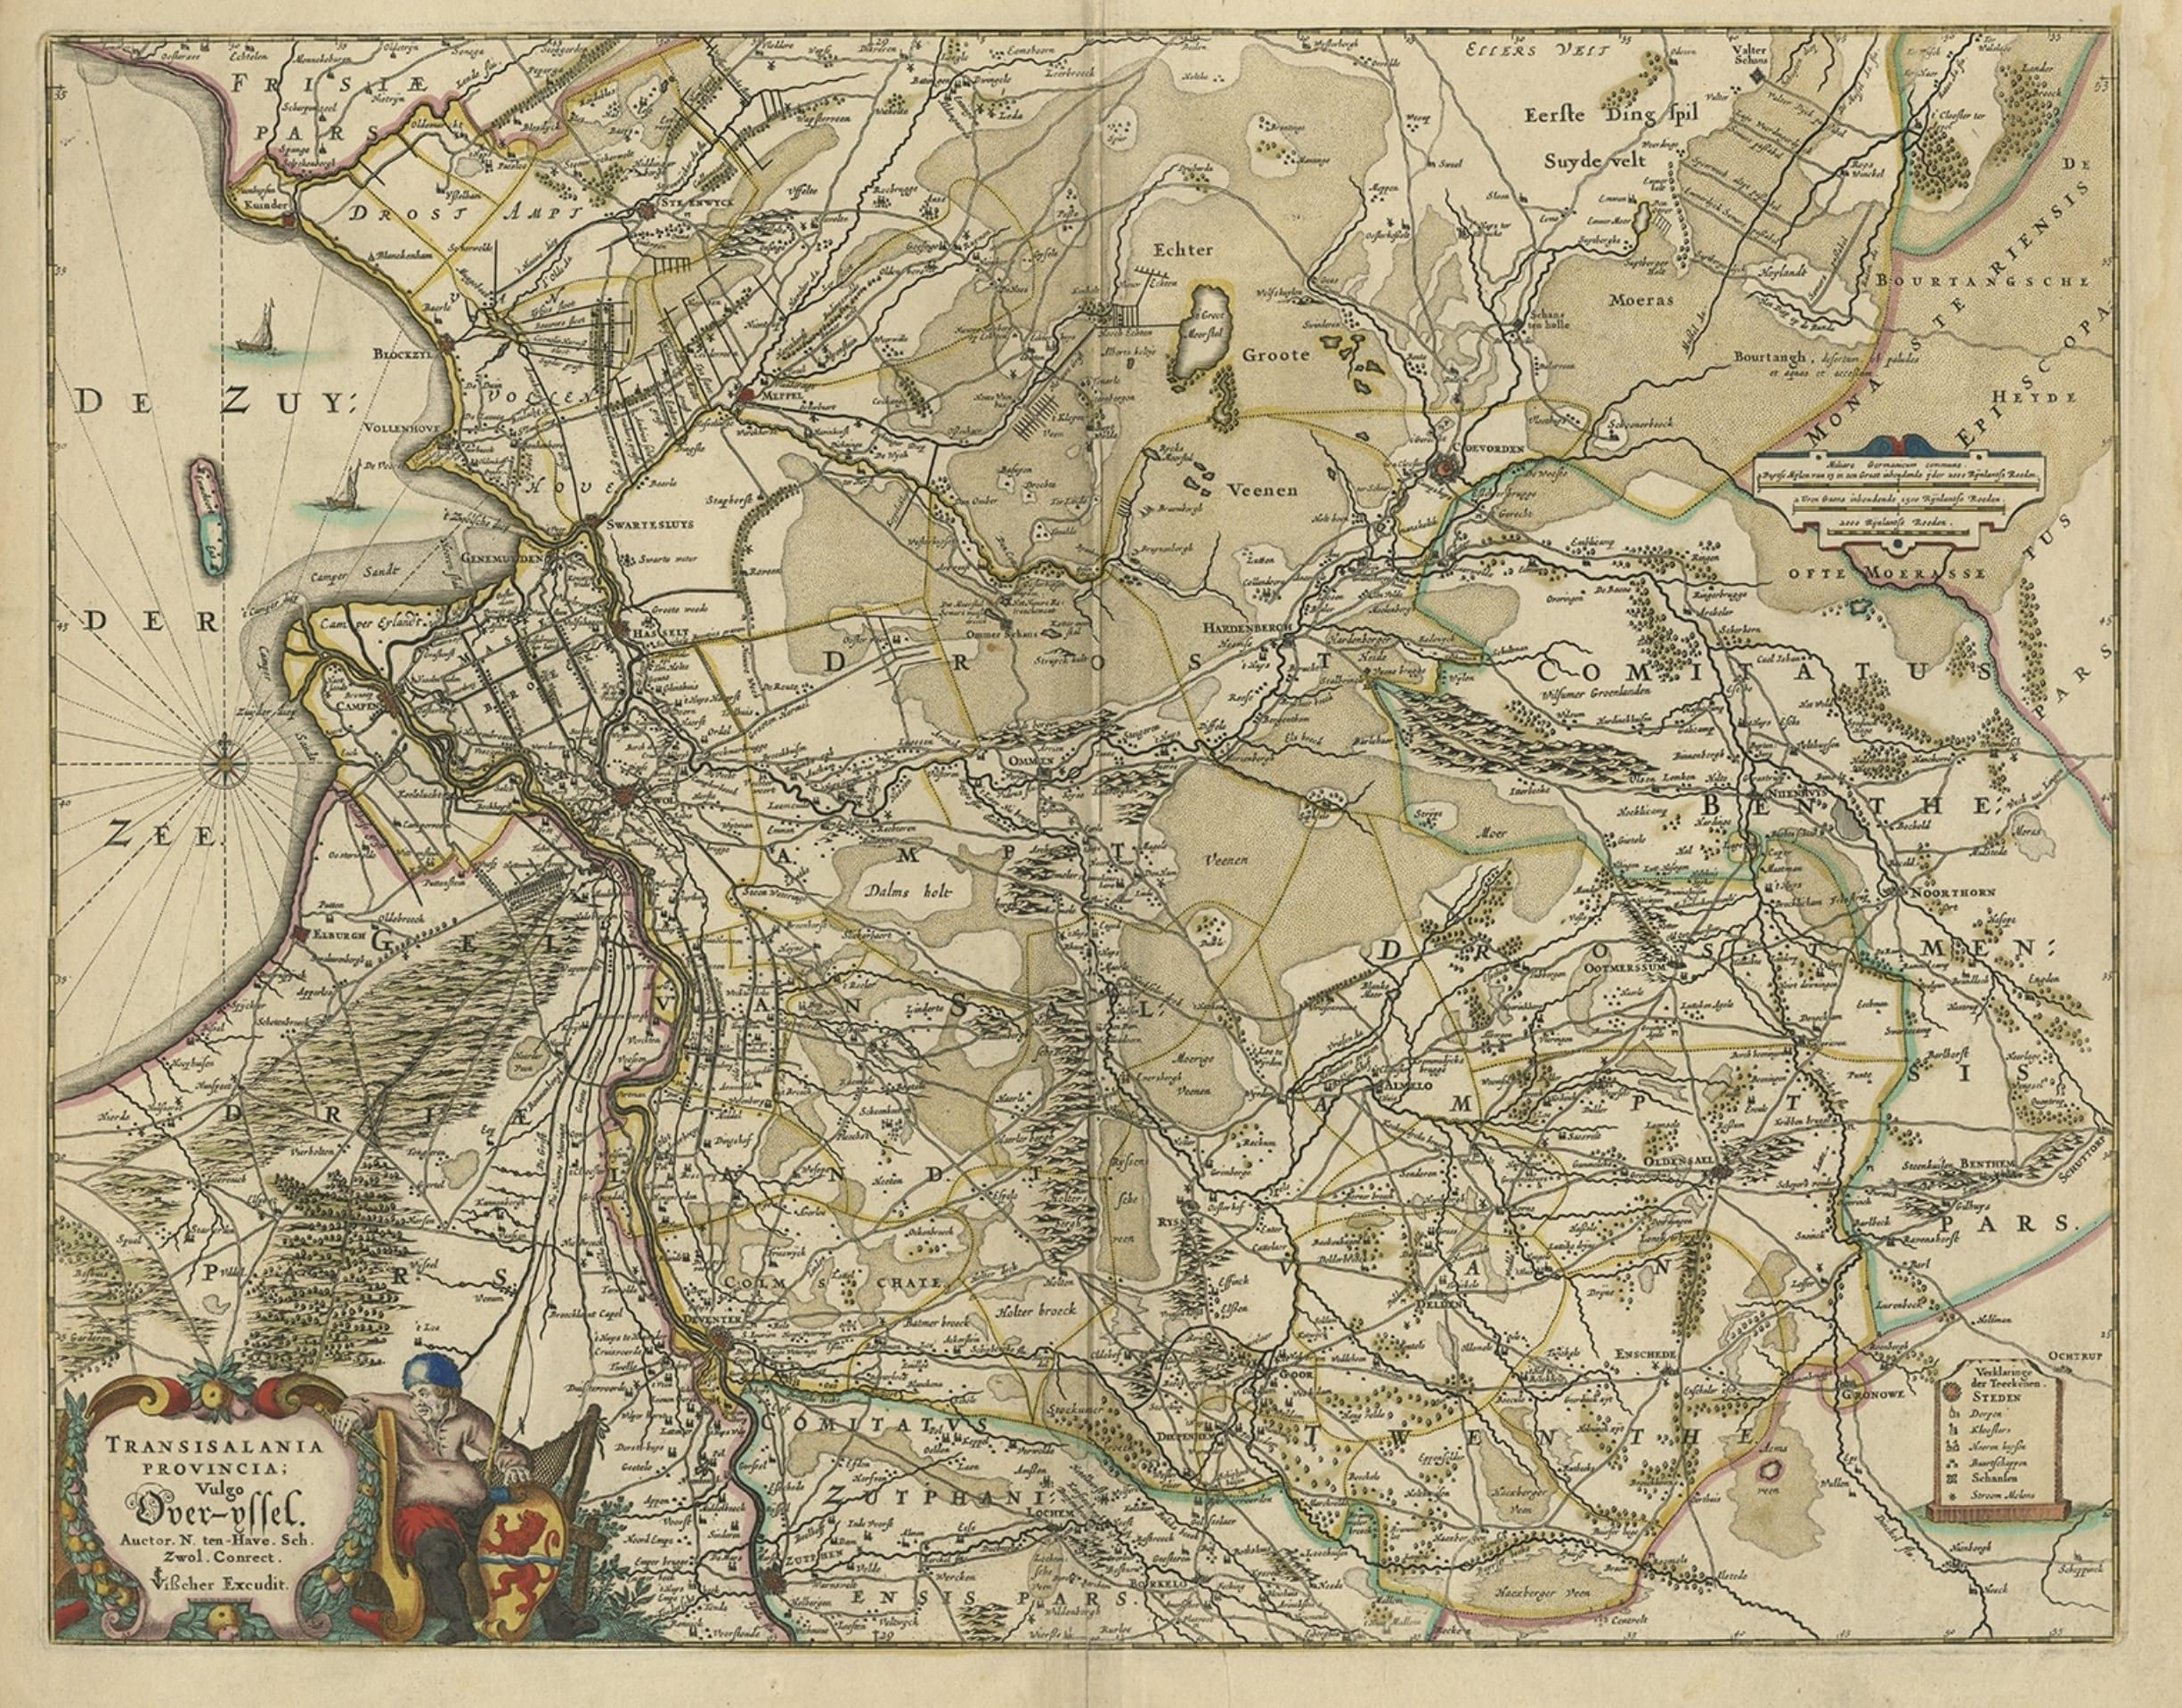 Antique print, titled: 'Transisalania Provincia vulgo Over-yssel.' 

Attractive original handcoloured map of the province of Overijssel, The Netherlands. With beautiful title cartouche, compass rose and key. Originally published by C.J. Visscher